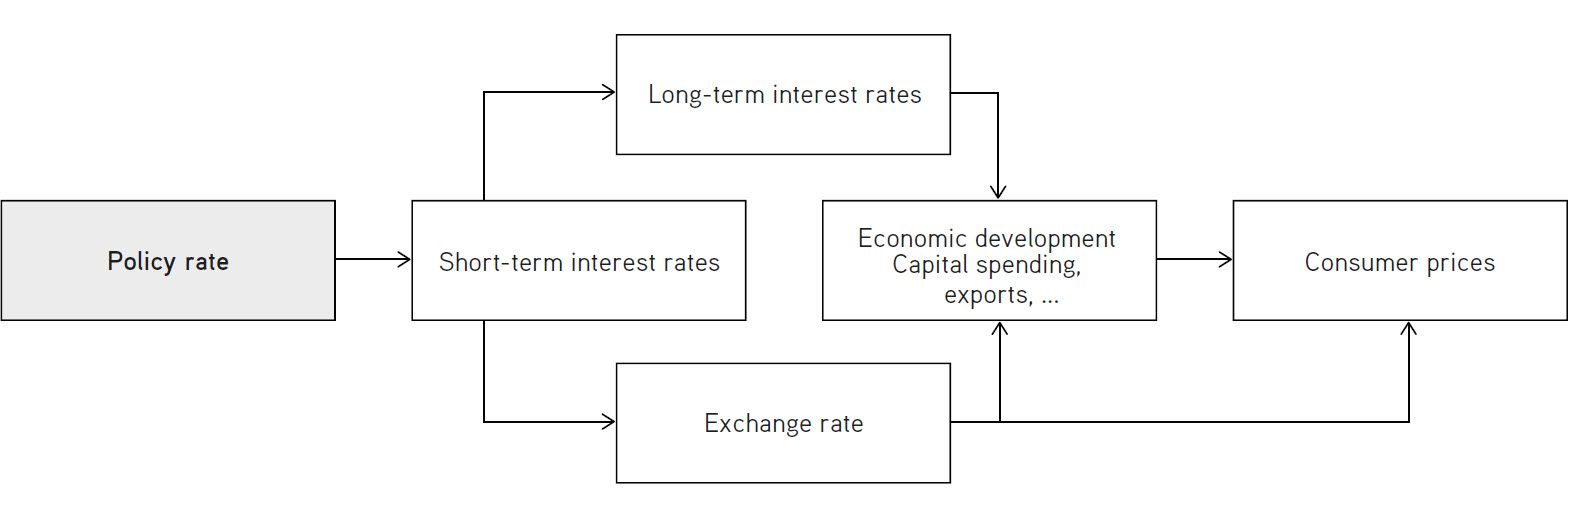 Diagram 1: Transmission of monetary policy activities to the economy